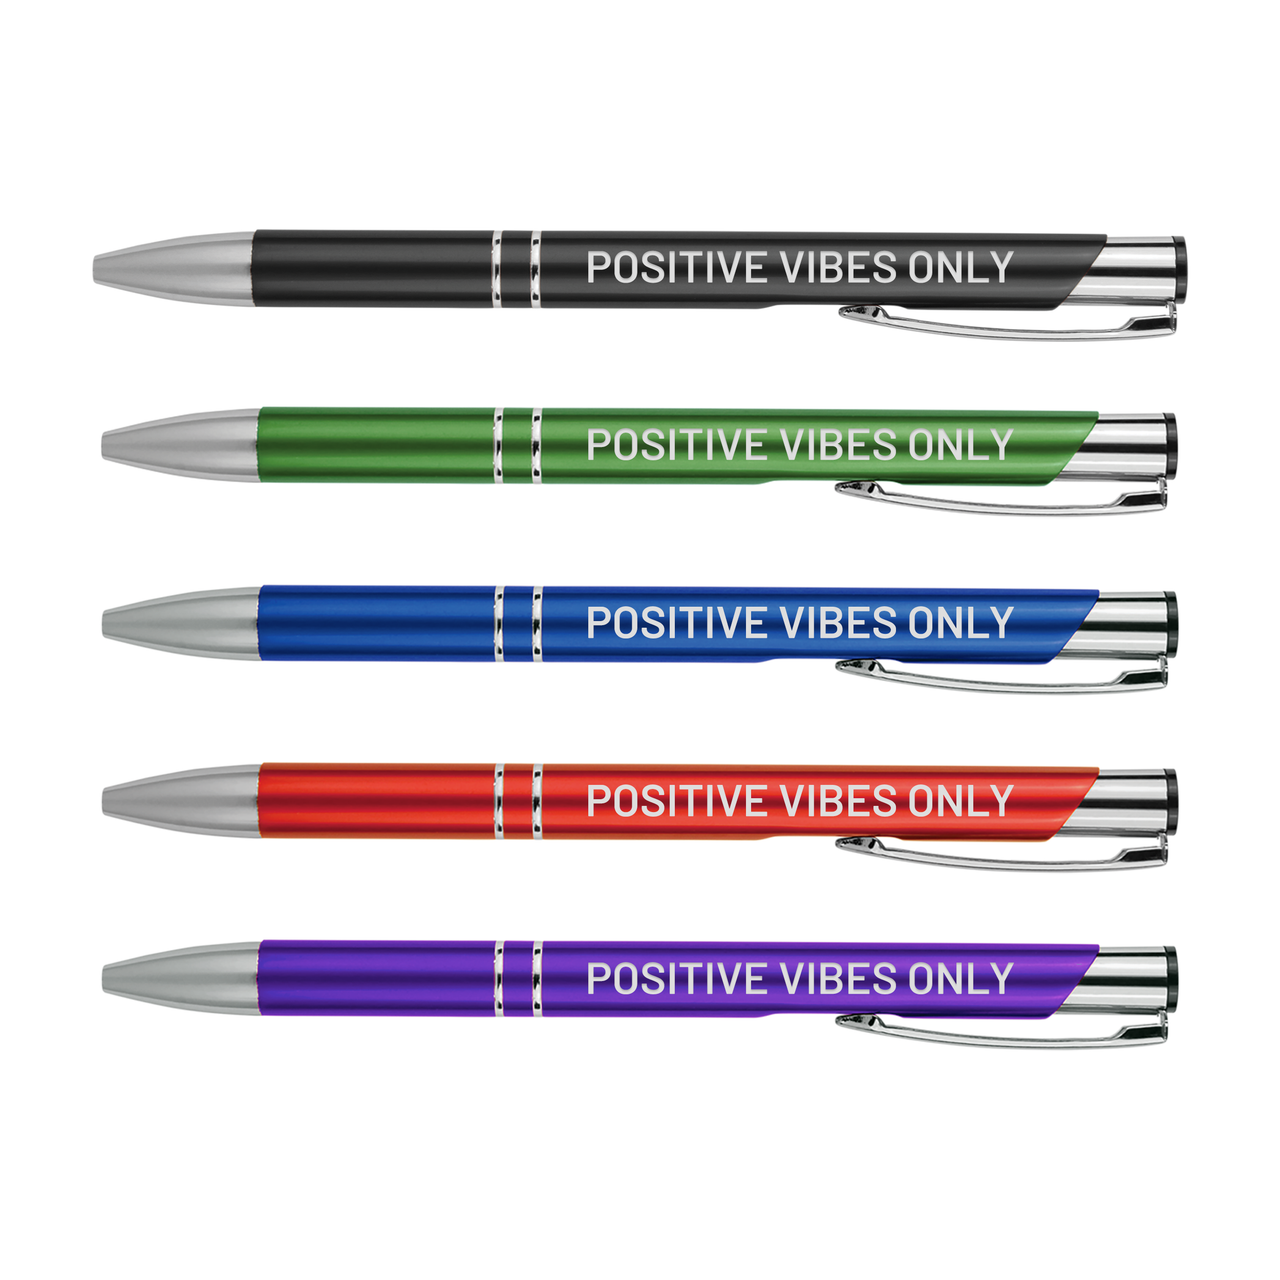 Positive Vibes Only Metal Pens | Motivational Writing Tools Office Supplies Coworker Gifts Stocking Stuffer Baum Designs